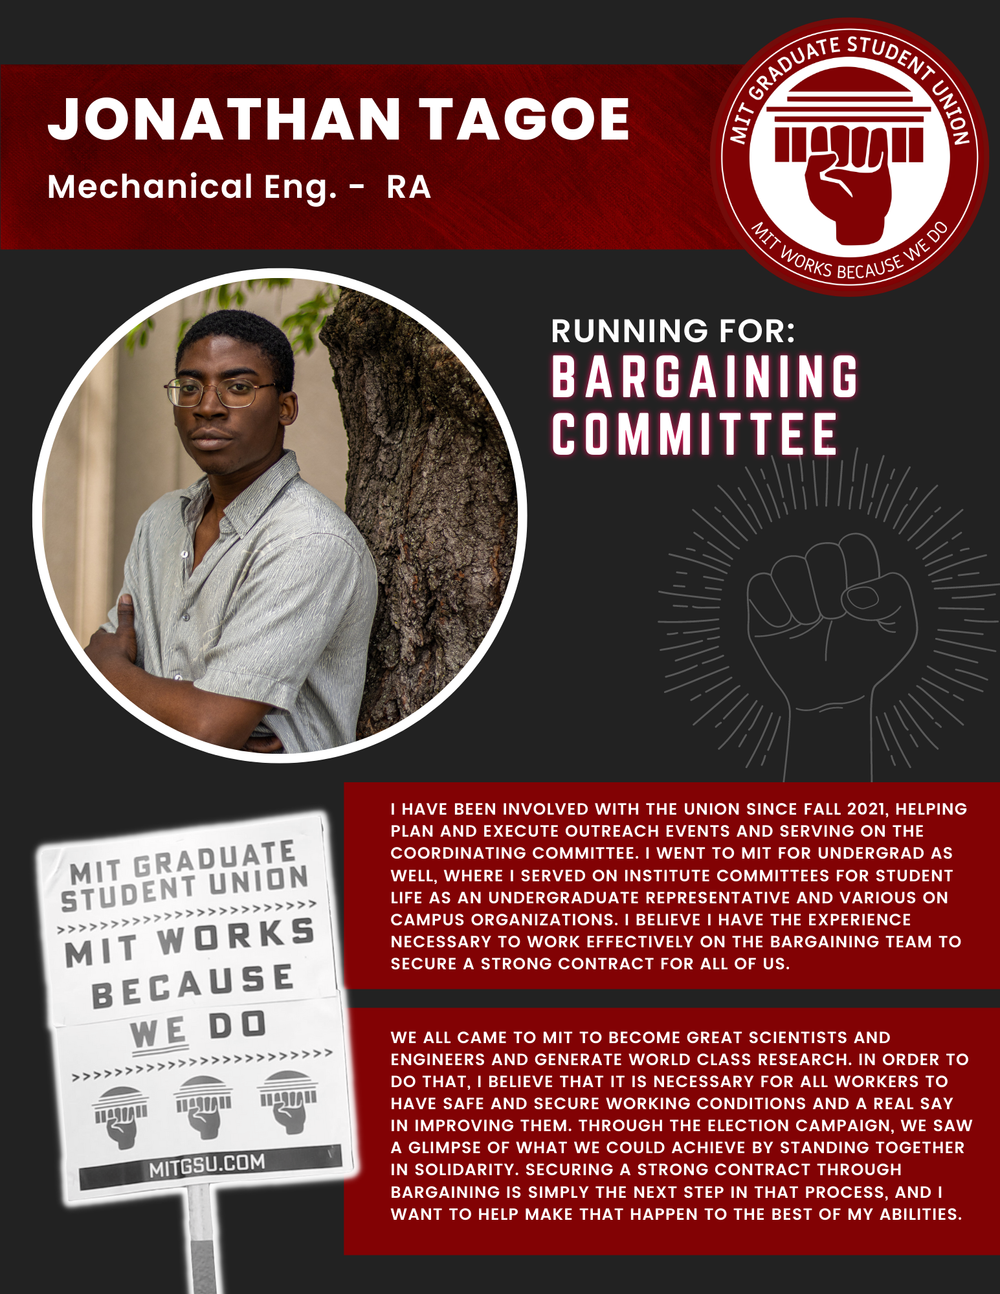  JONATHAN TAGOE  Mechanical Eng. - RA   RUNNING FOR: Bargaining Committee  I HAVE BEEN INVOLVED WITH THE UNION SINCE FALL 2021, HELPING PLAN AND EXECUTE OUTREACH EVENTS AND SERVING ON THE COORDINATING COMMITTEE. I WENT TO MIT FOR UNDERGRAD AS WELL, W